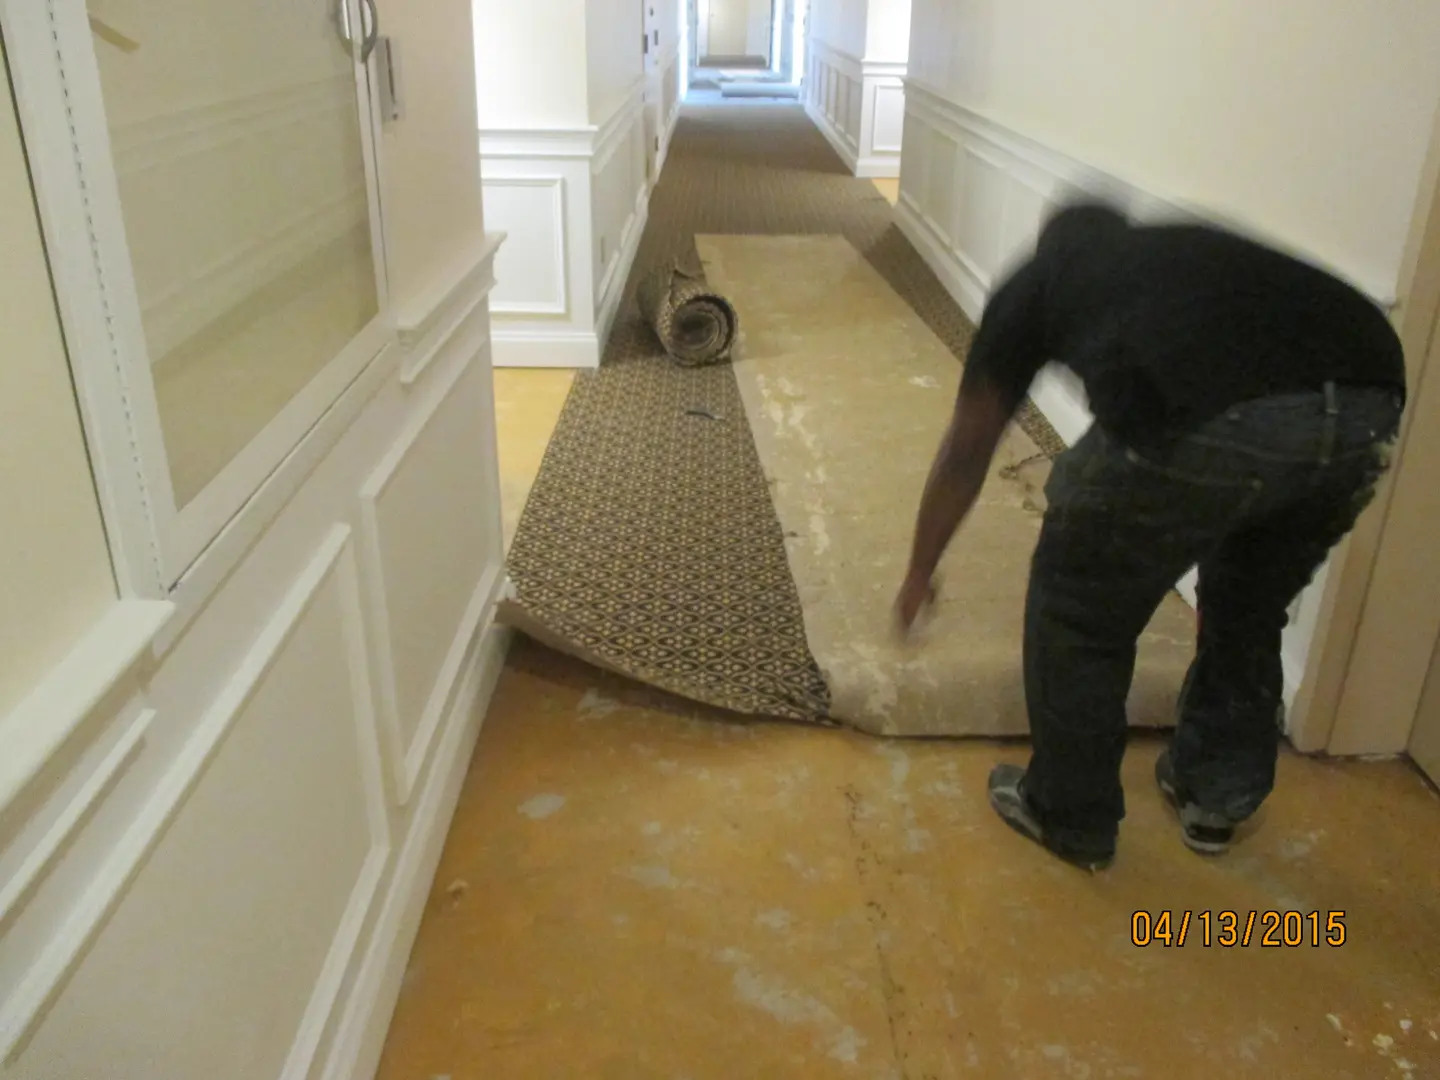 A man is removing carpet from the floor.